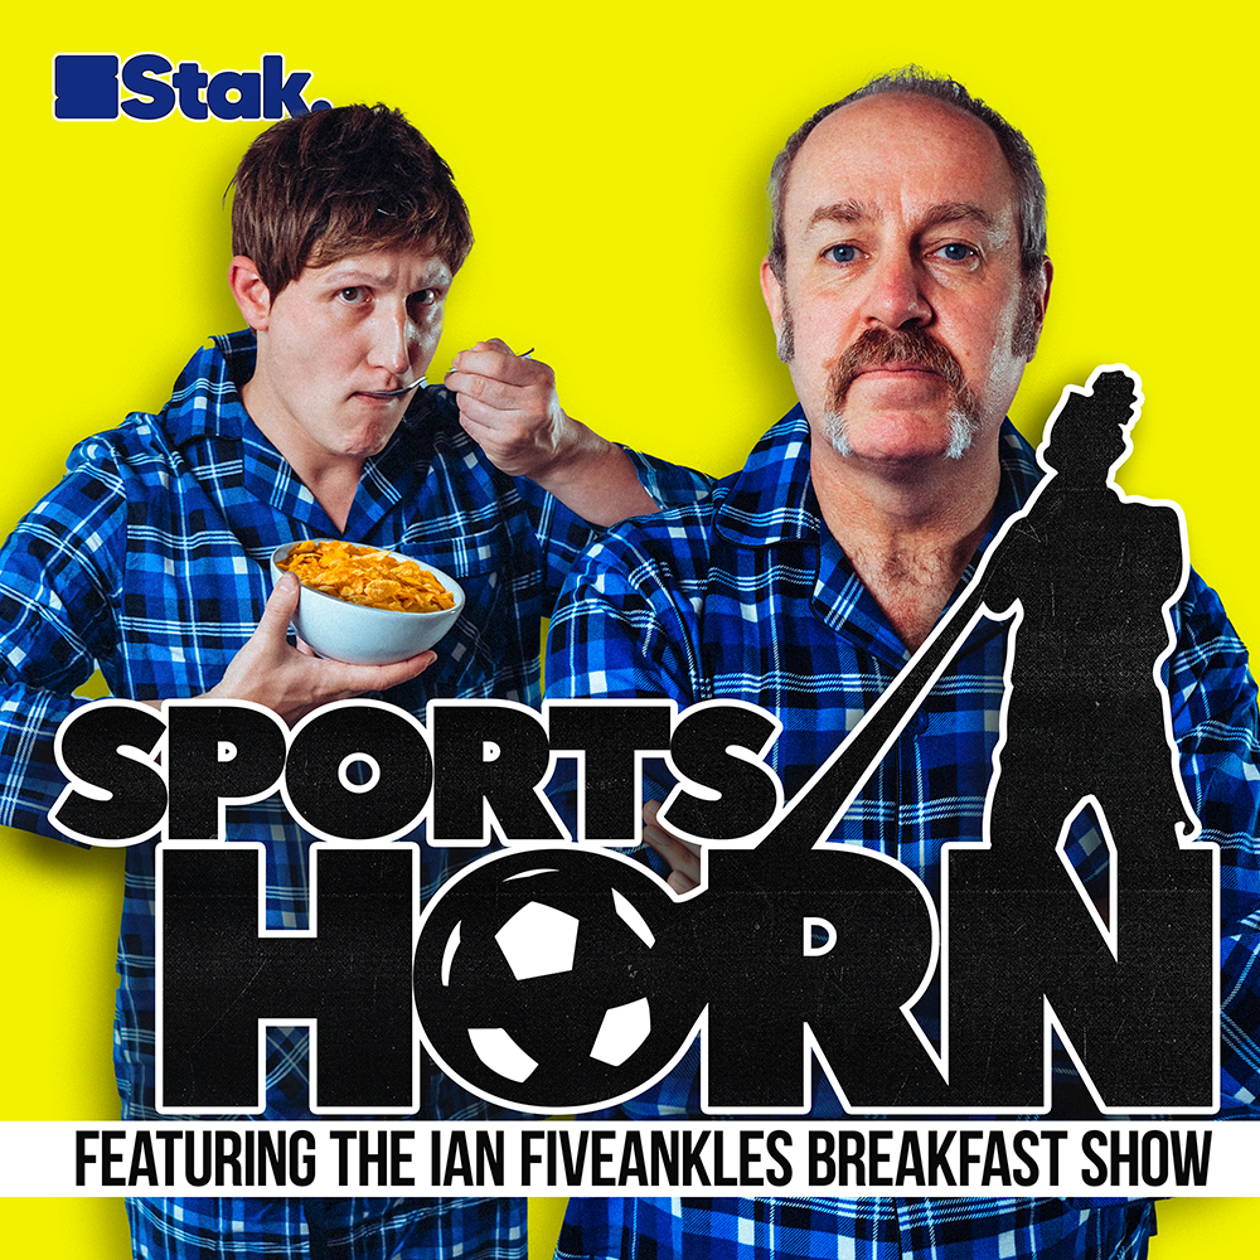 Artwork for the Sports Horn podcast.